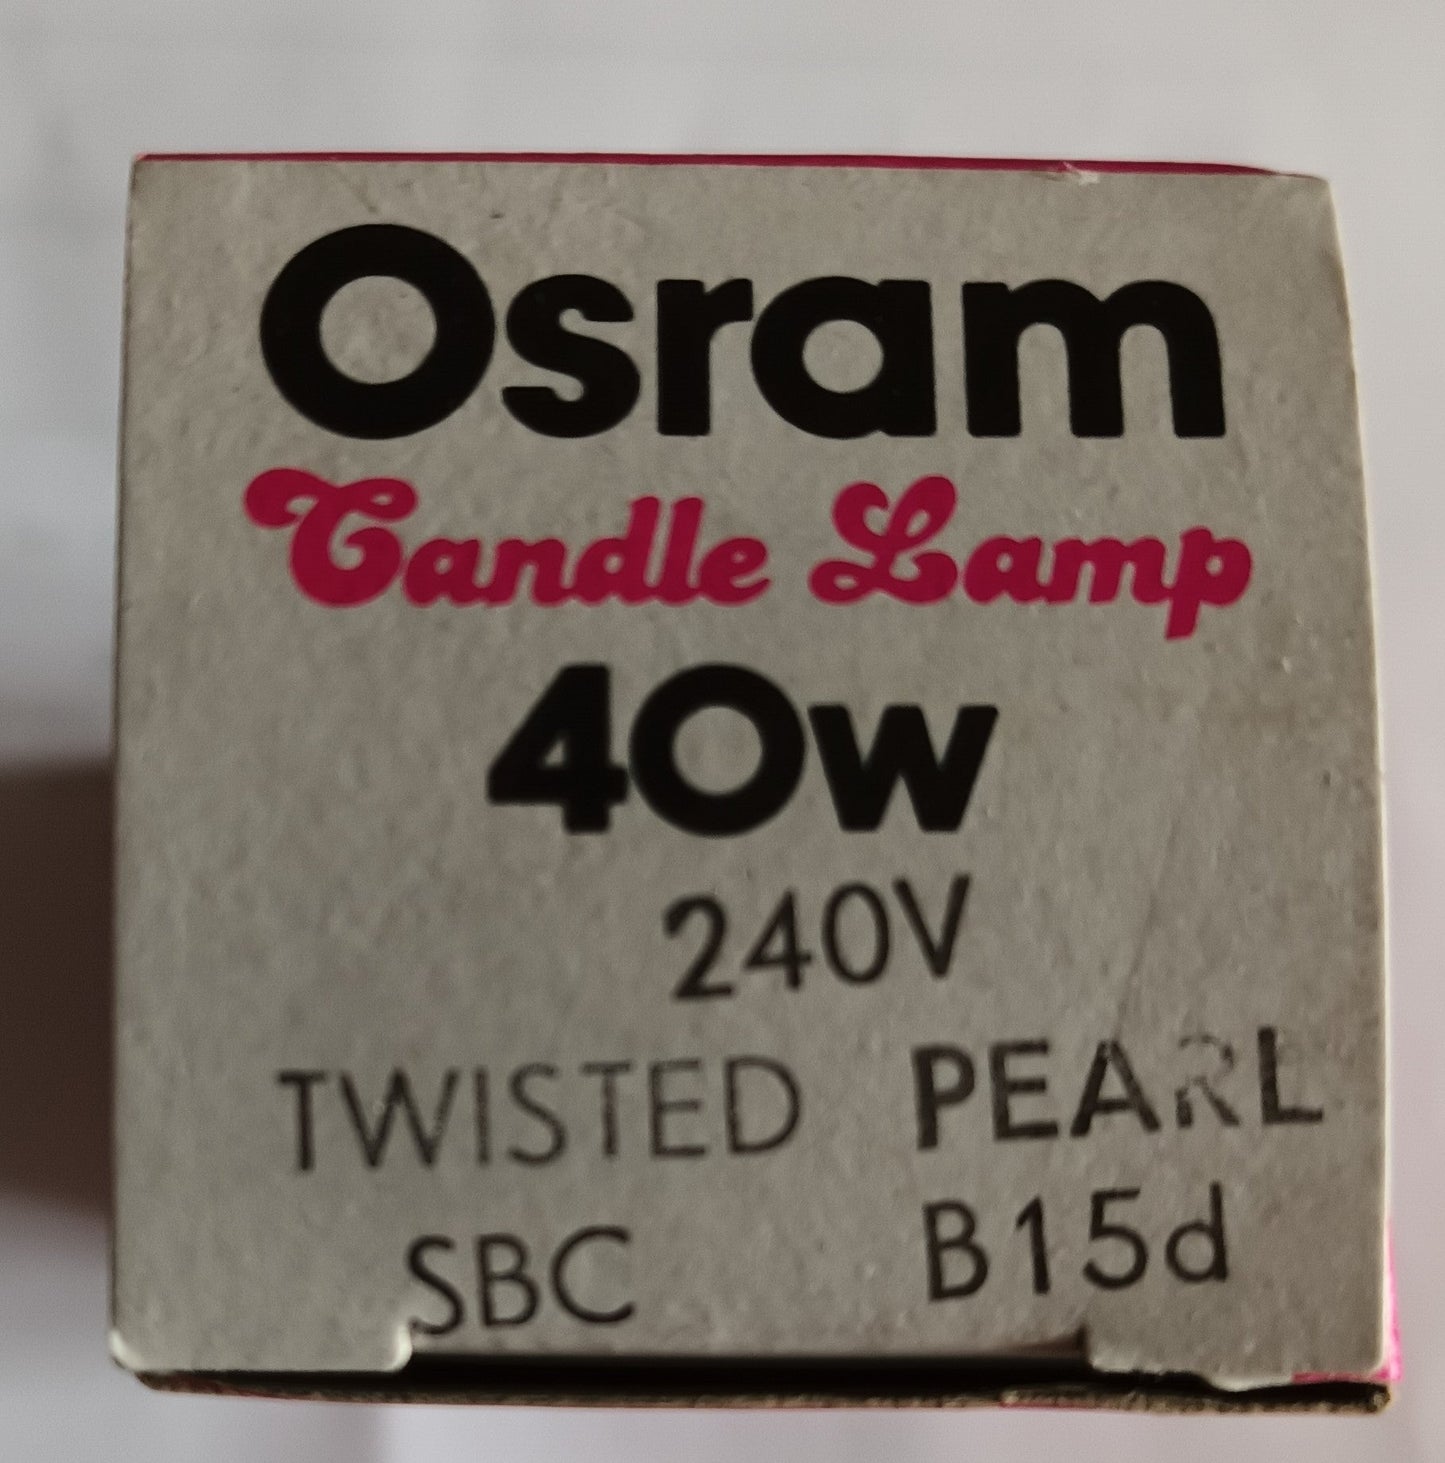 Candle sBC / B15 40Ws twisted pearl made by Osram in England